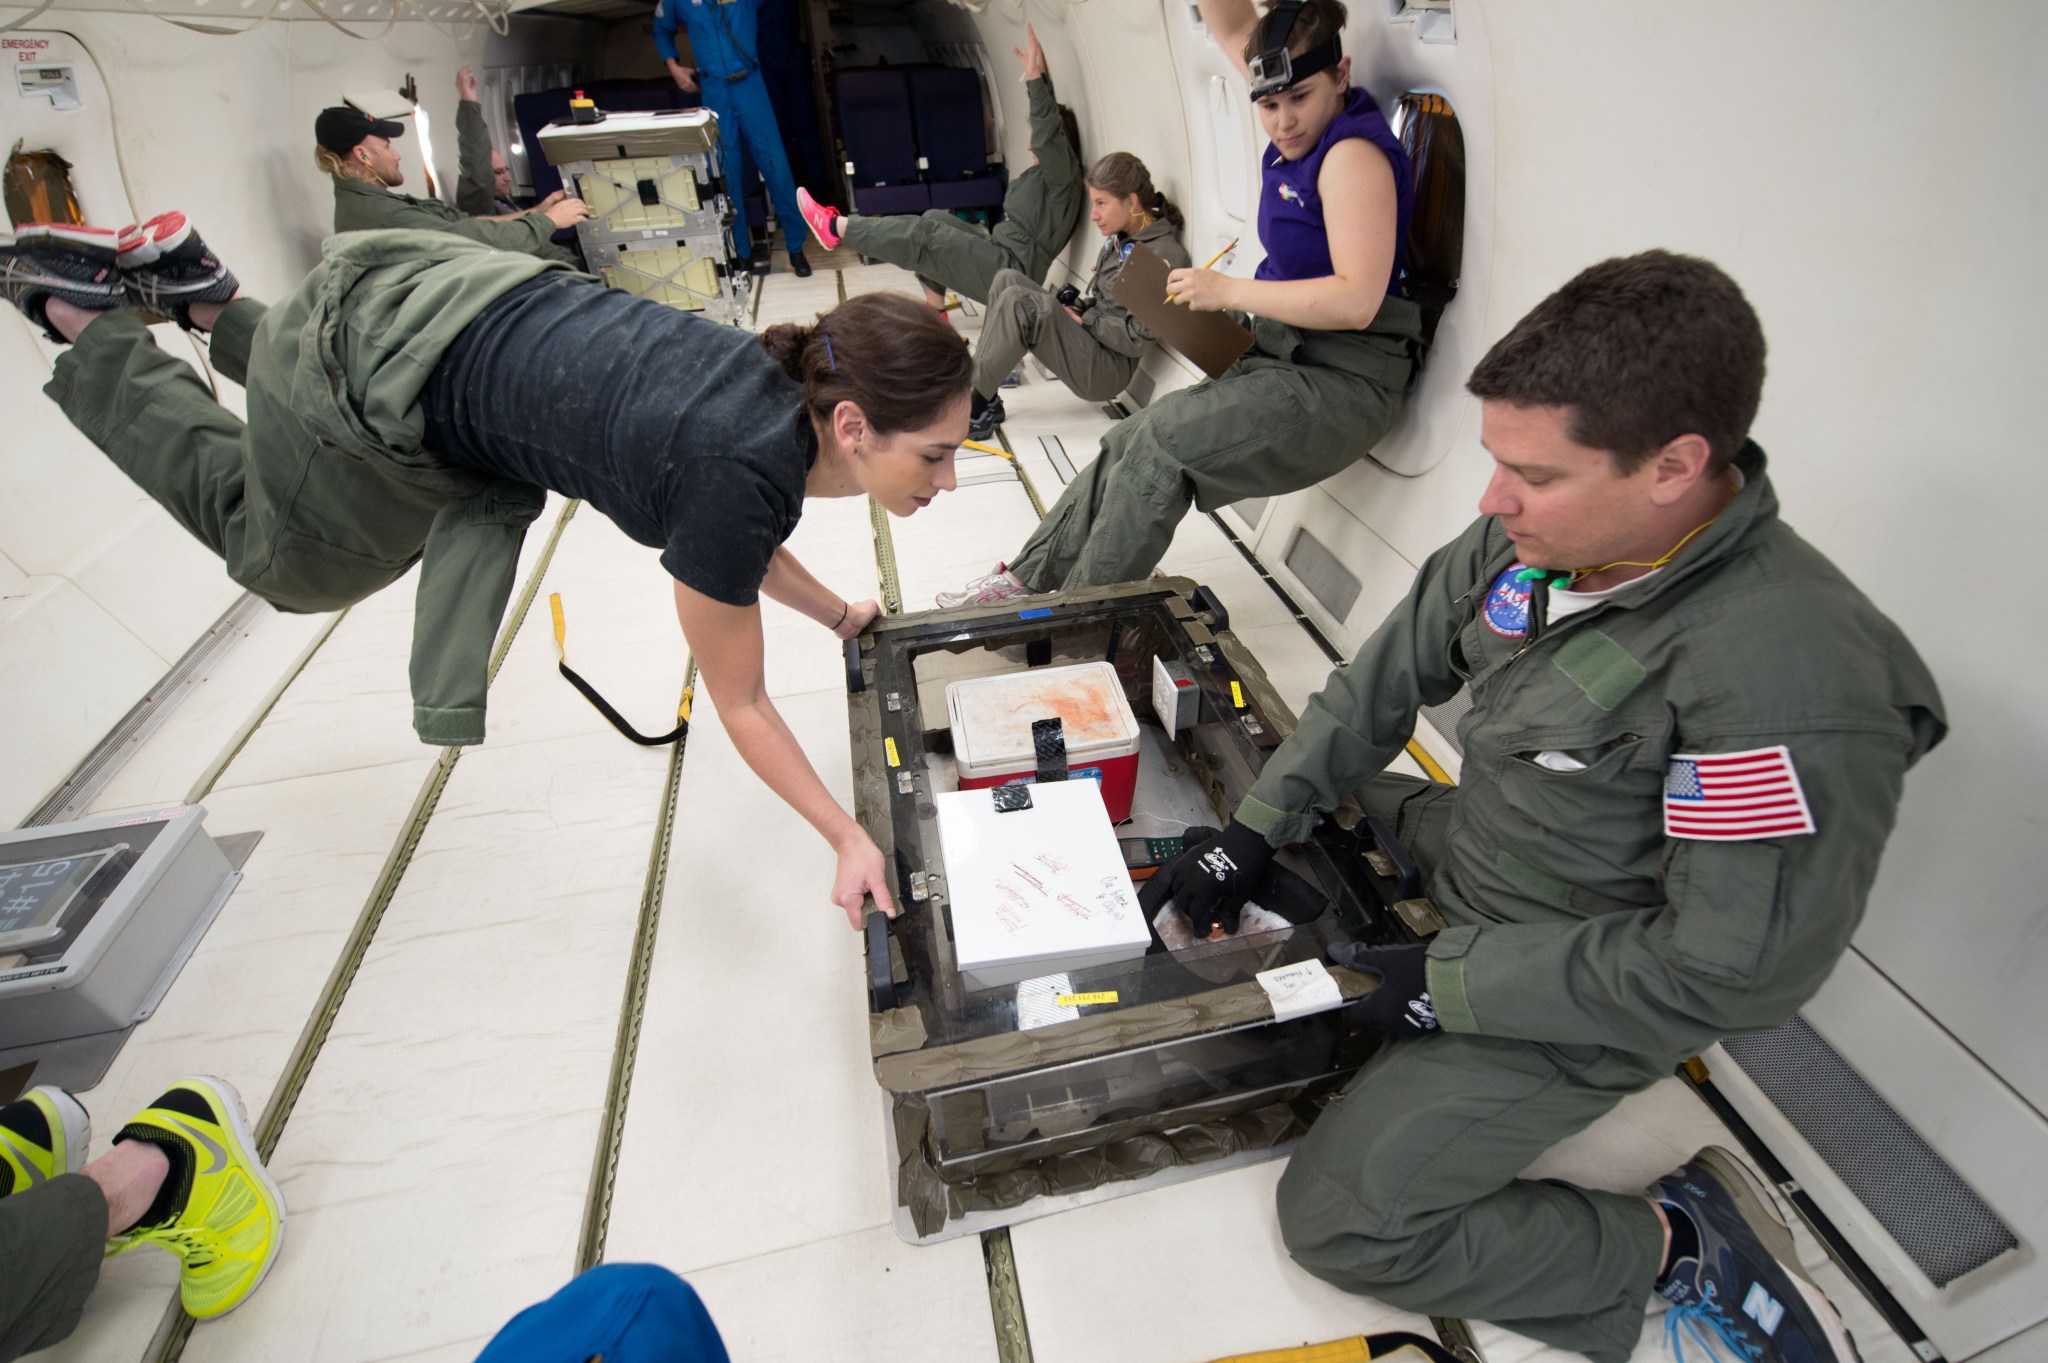 Northwestern University researchers gathered data for their foam experiment during parabolic flight.